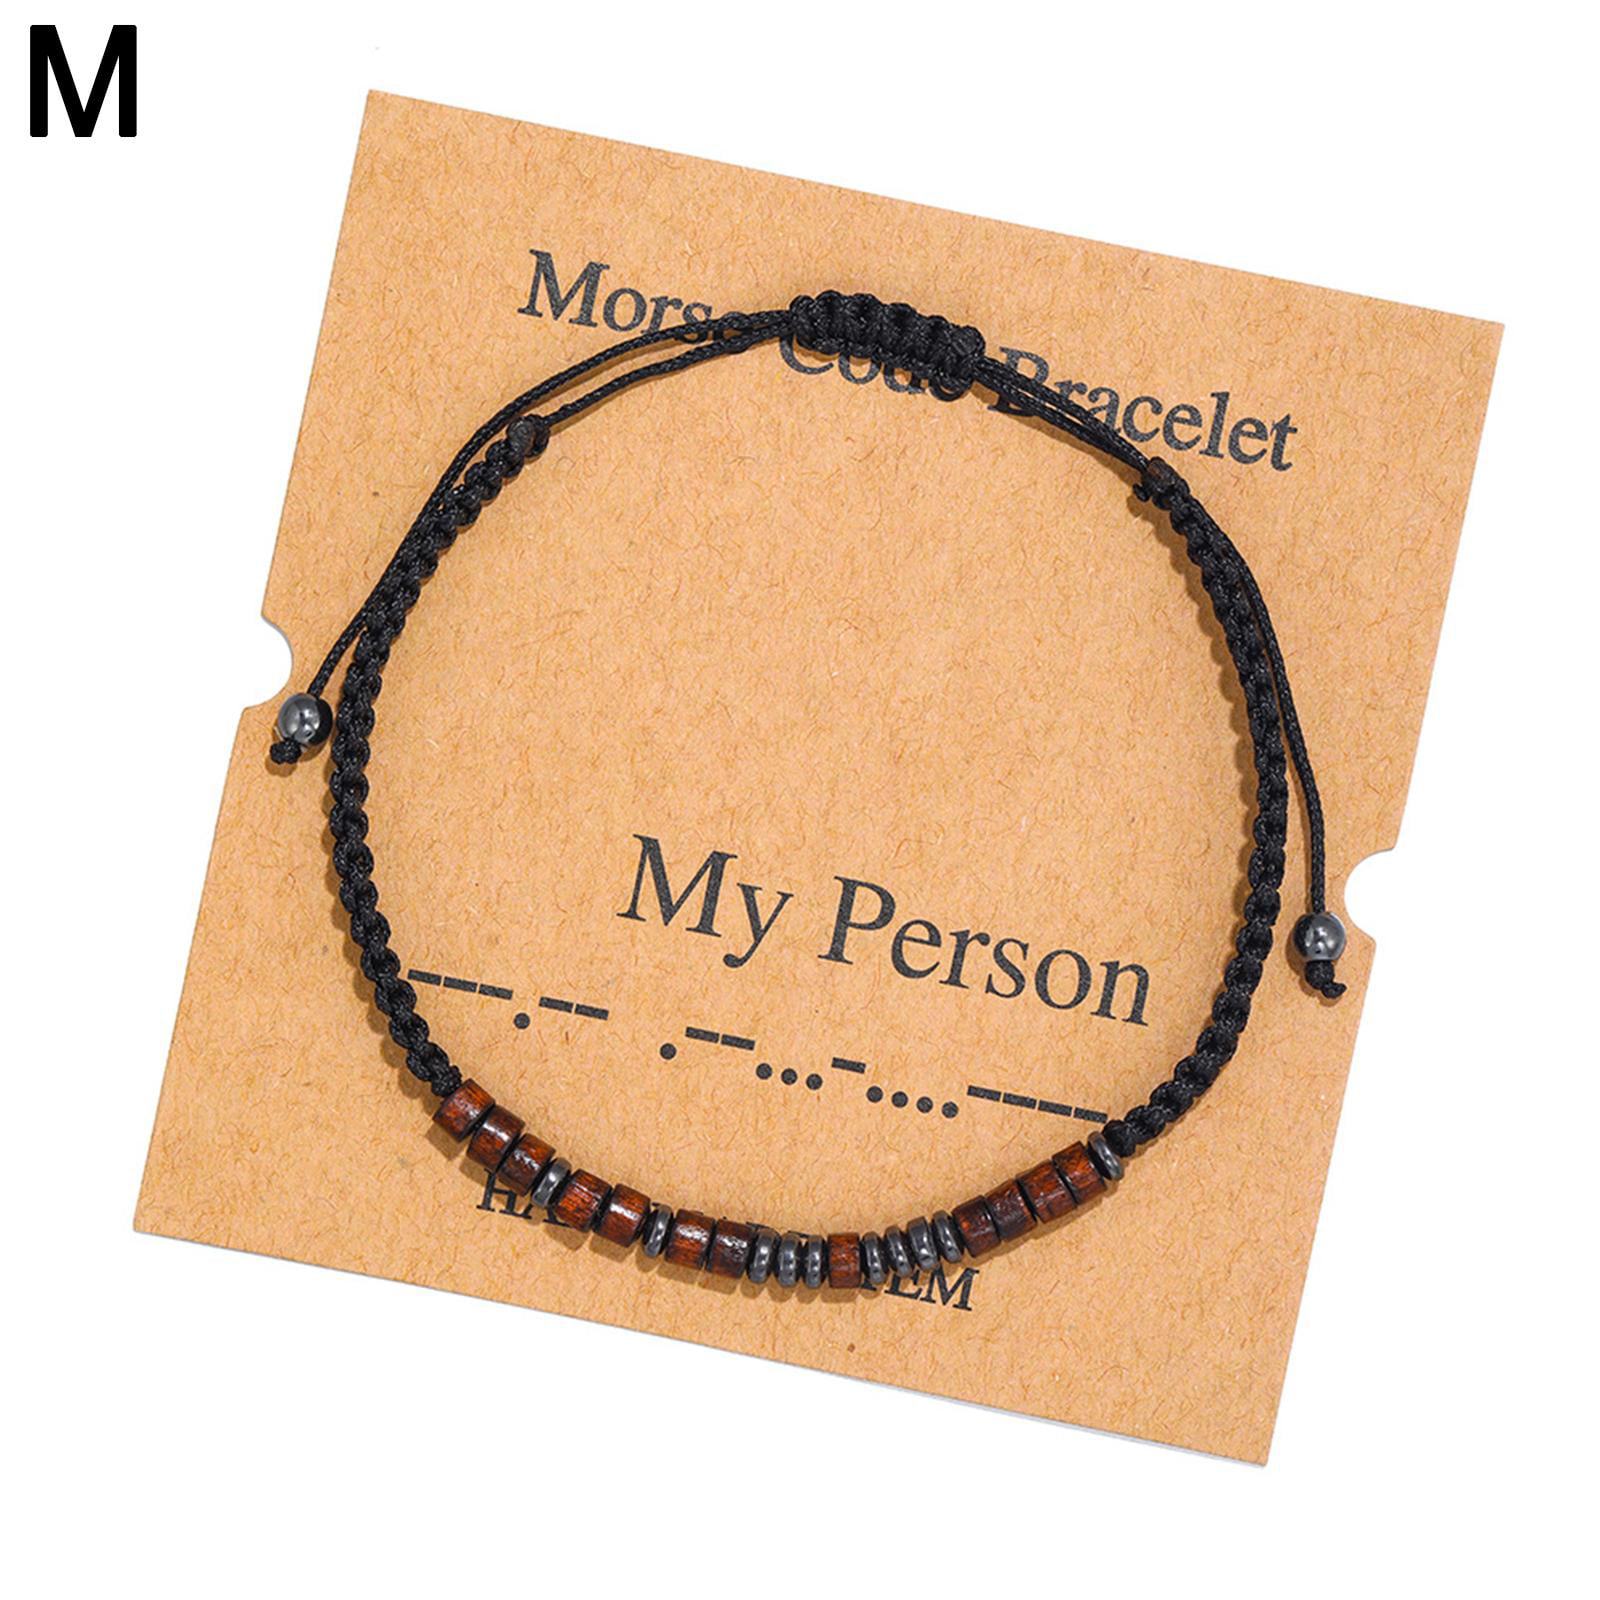 LIUZHIPENG Letters and Numbers Code Bracelets for Women Men String